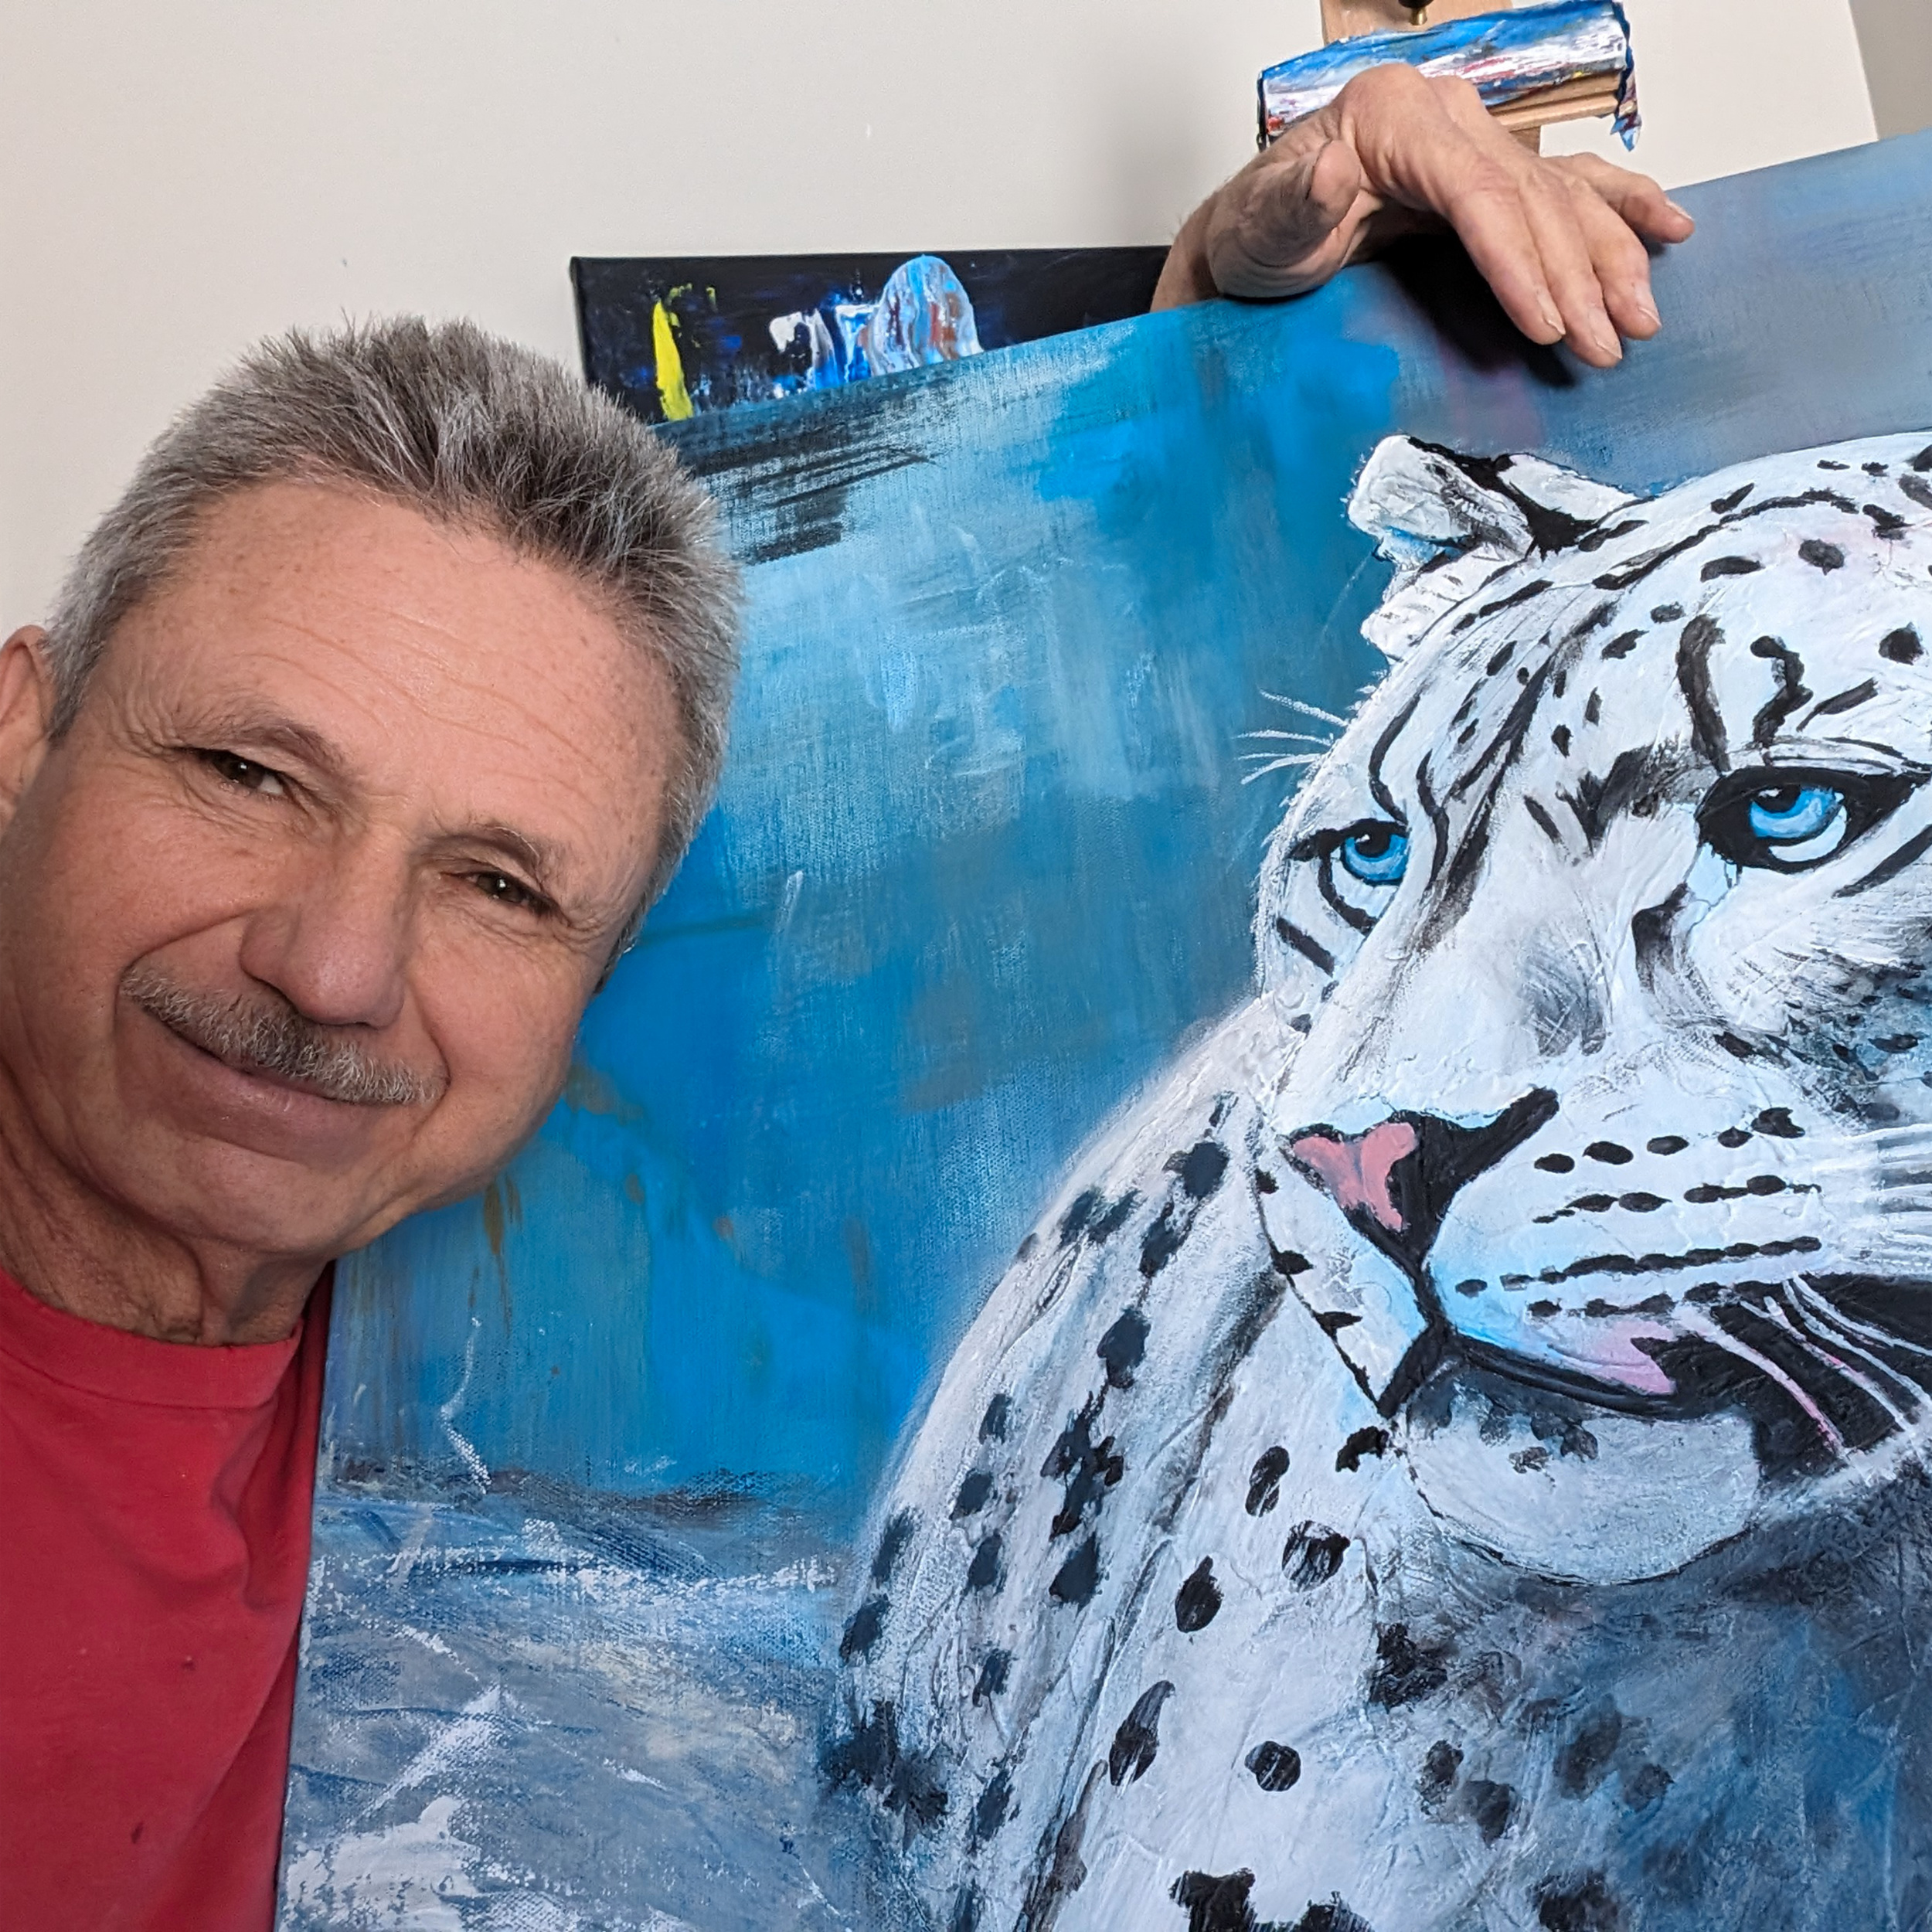 Snow Leopard Painting - 40 x 30 inches